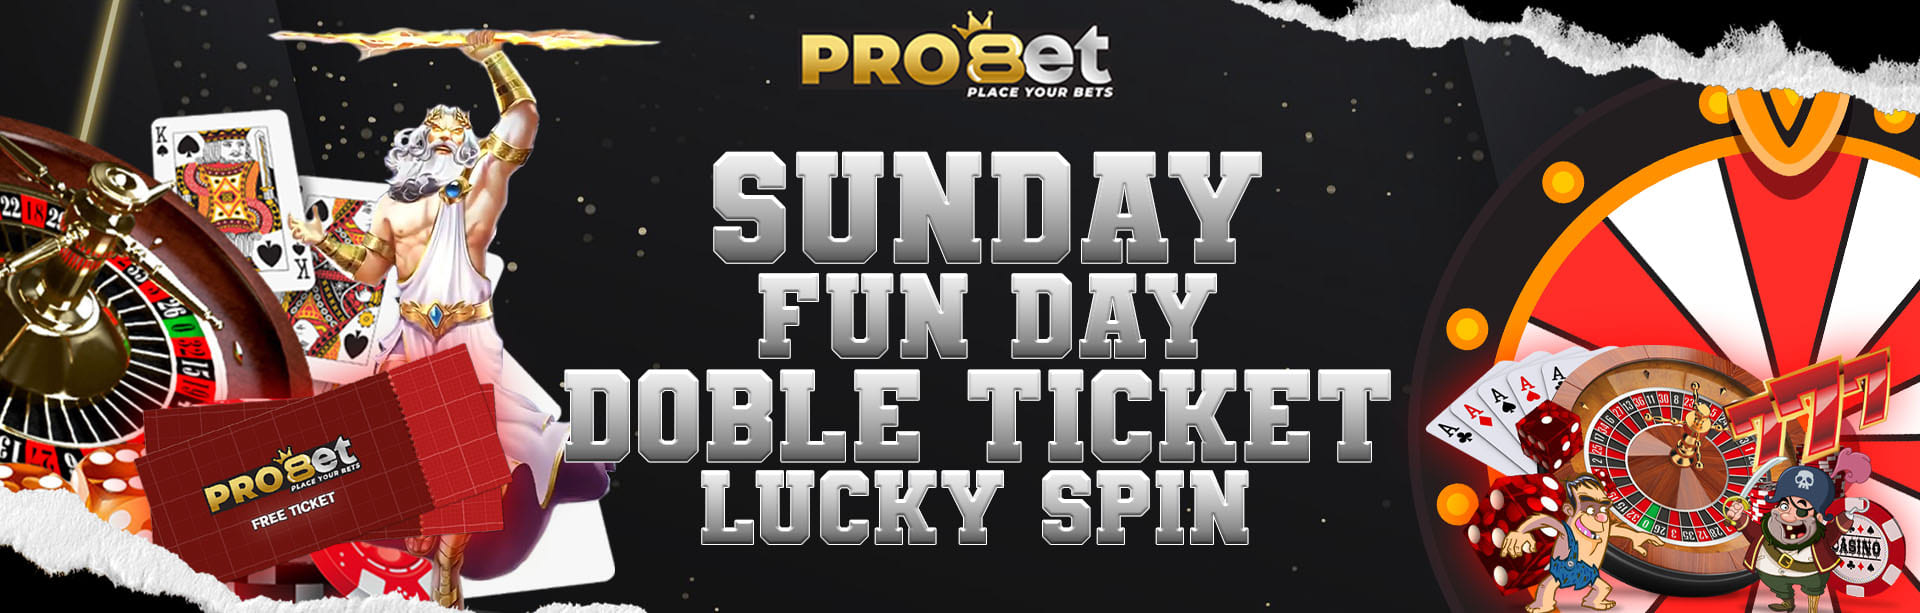 SUNDAY FUN DAY (DOUBLE TIKET LUCKY SPIN)